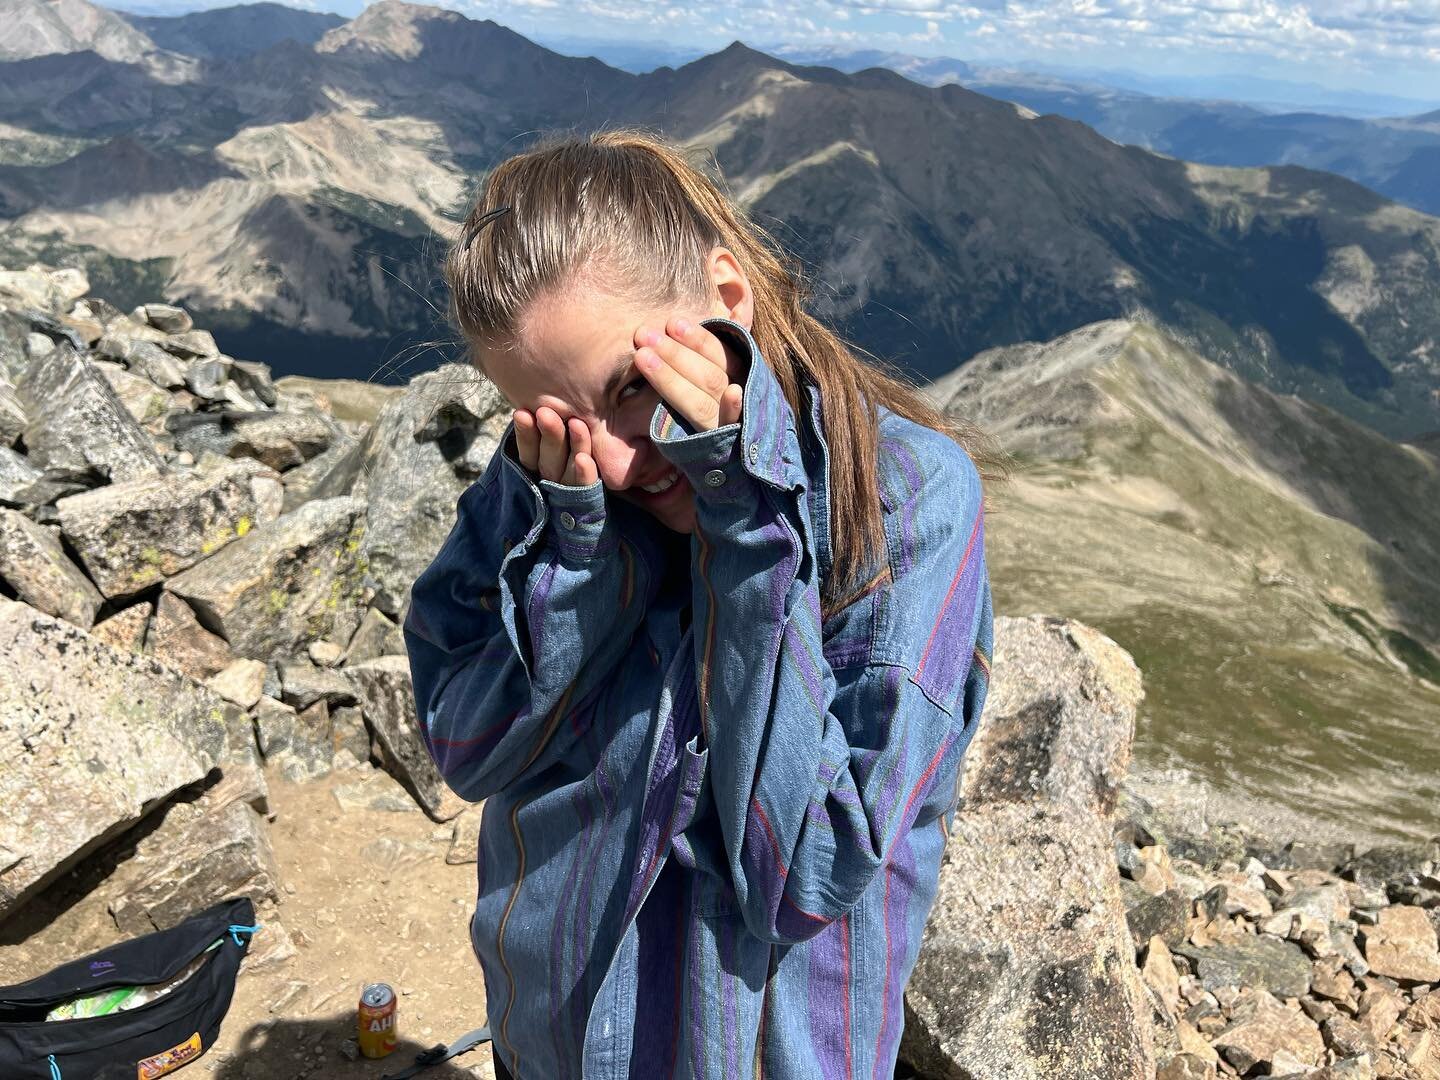 (Pt. 2, The Sunmit) Yesterday we Tromped again, but this time with a capital T for 14er (there&rsquo;s a T in there we swear). For pics of the ascent and descent, see part 1! 

#mtyale #colorado #14er #daysoff #leavenotrace #hiking